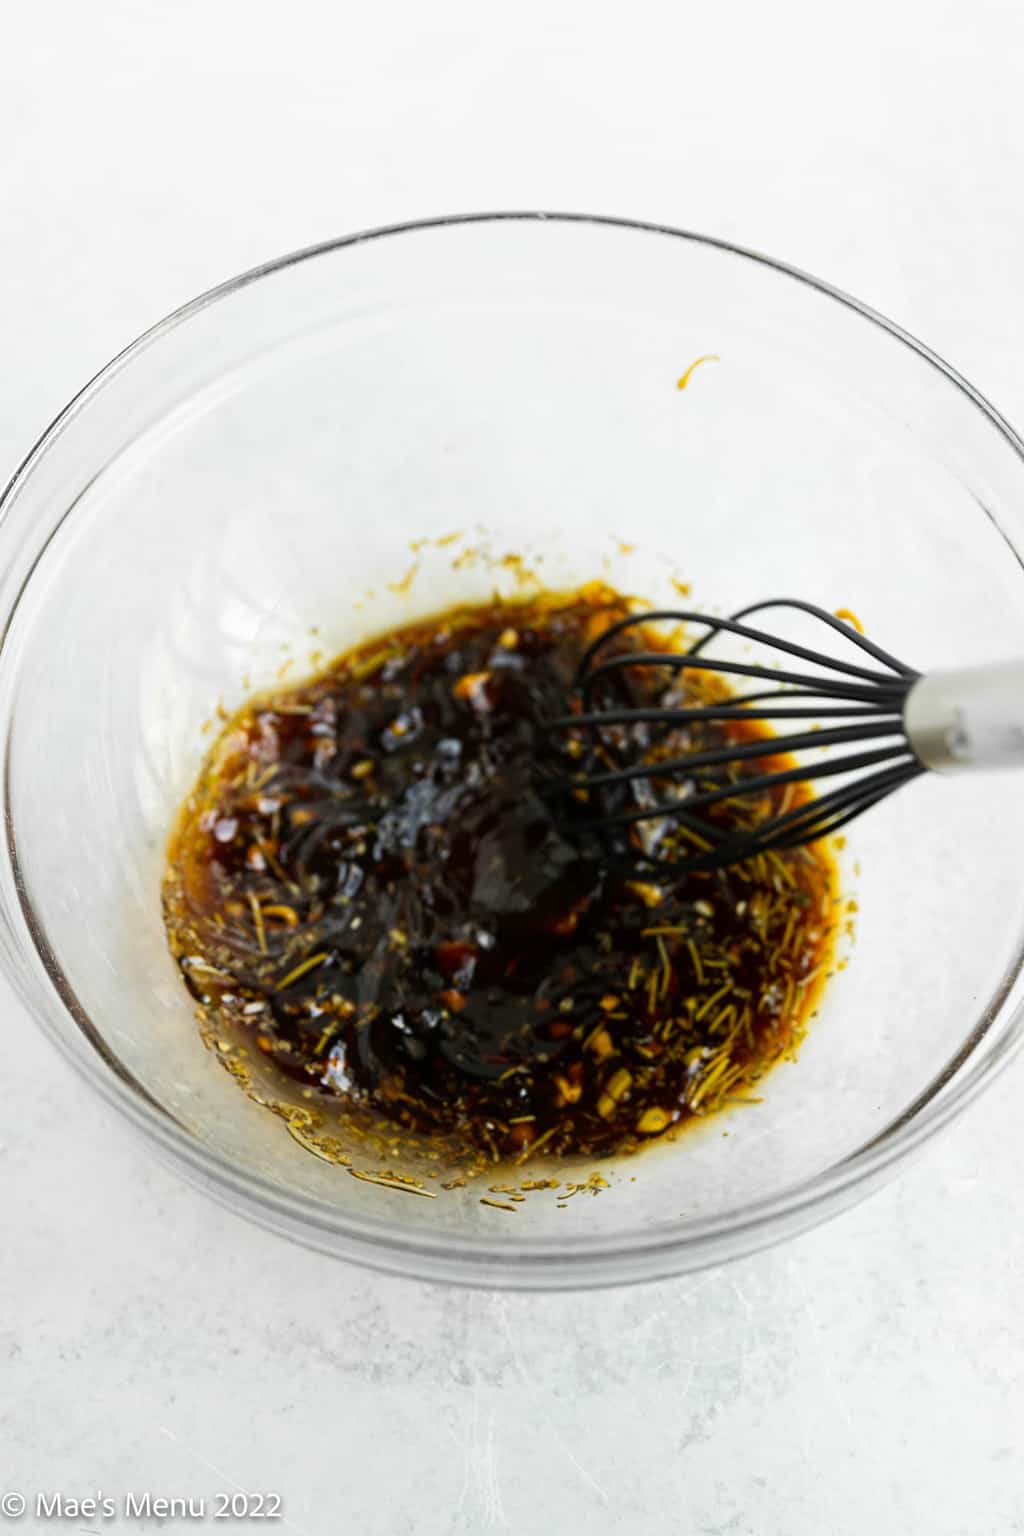 Whisking the steak marinade in a clear bowl.